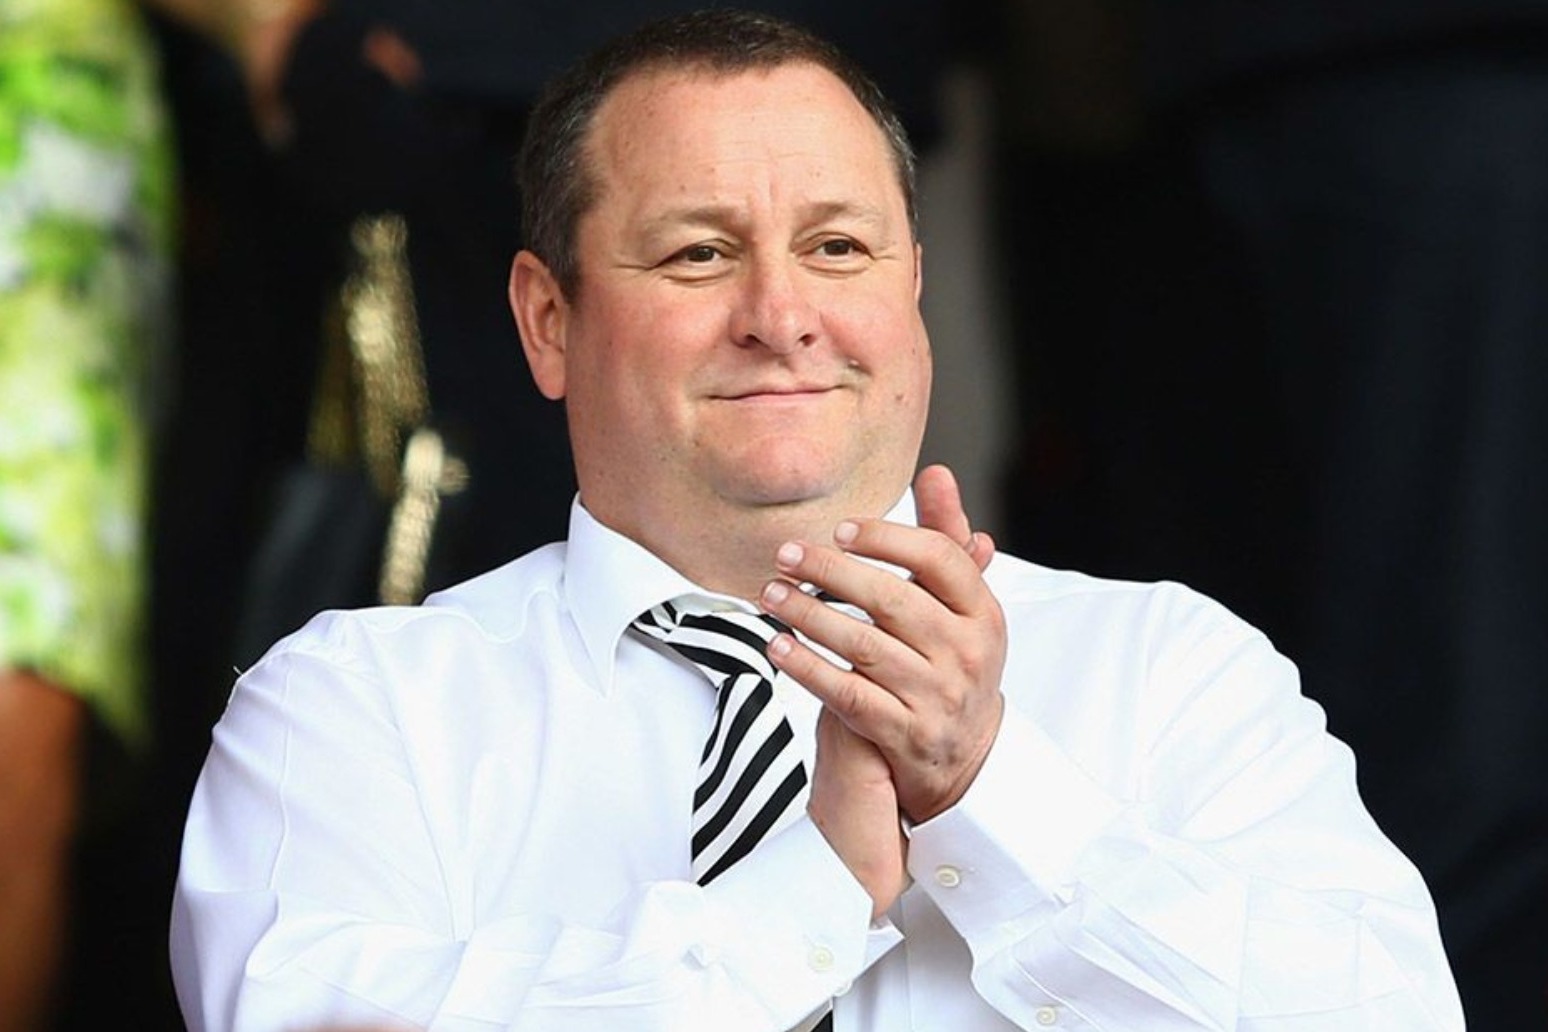 Mike Ashley to step down from Frasers board 